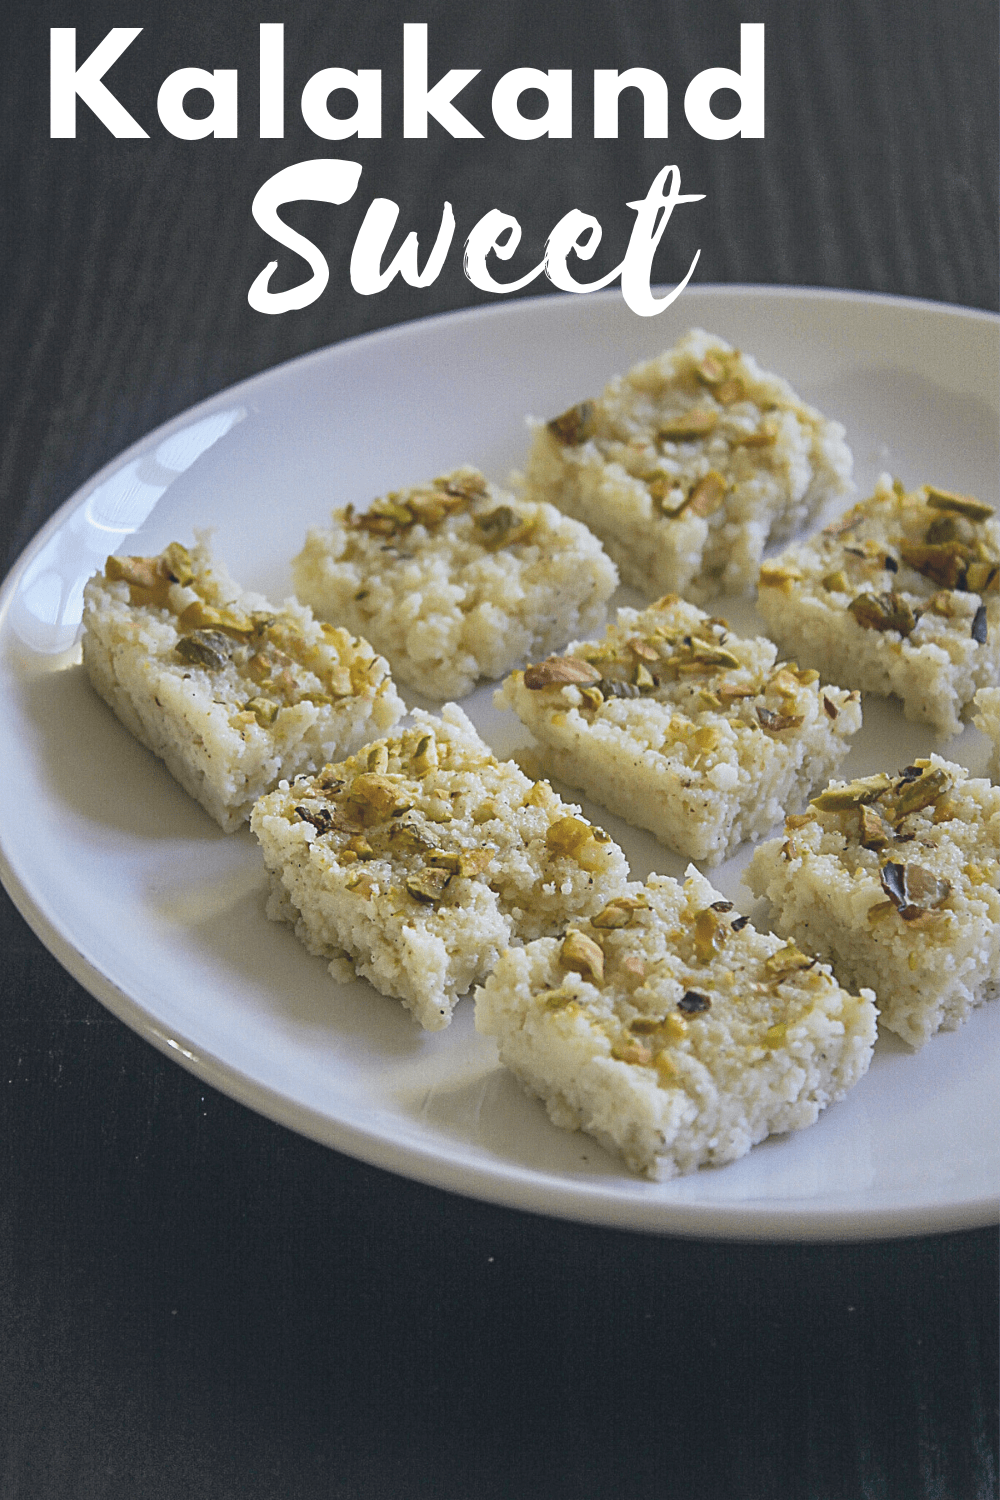 kalakand burfi arranged on a plate with text 'kalakand sweet' on the image for pinterest